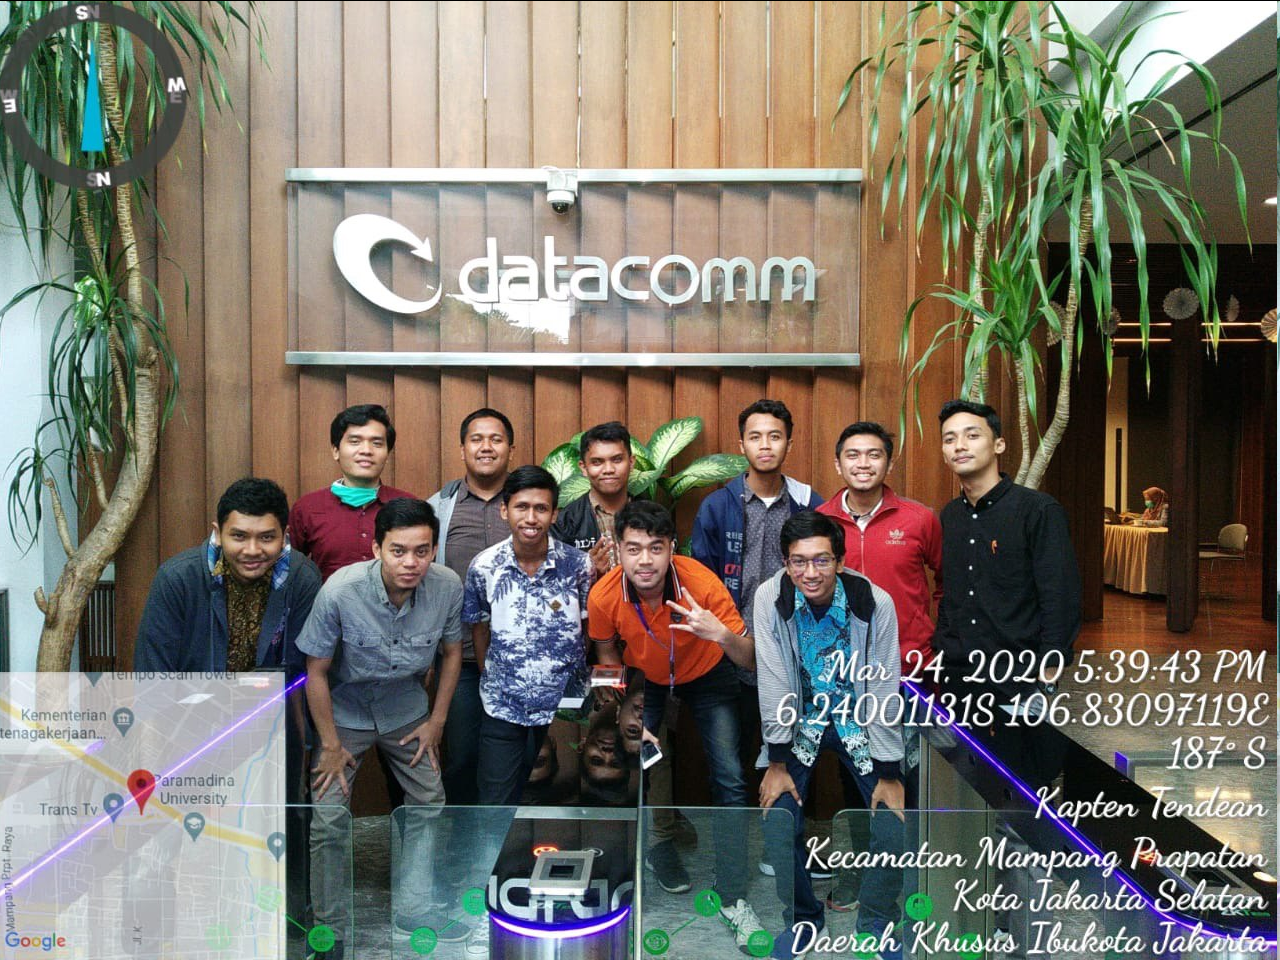 With another colleagues (Coop. Network) at Graha Datacomm HO/HQ.